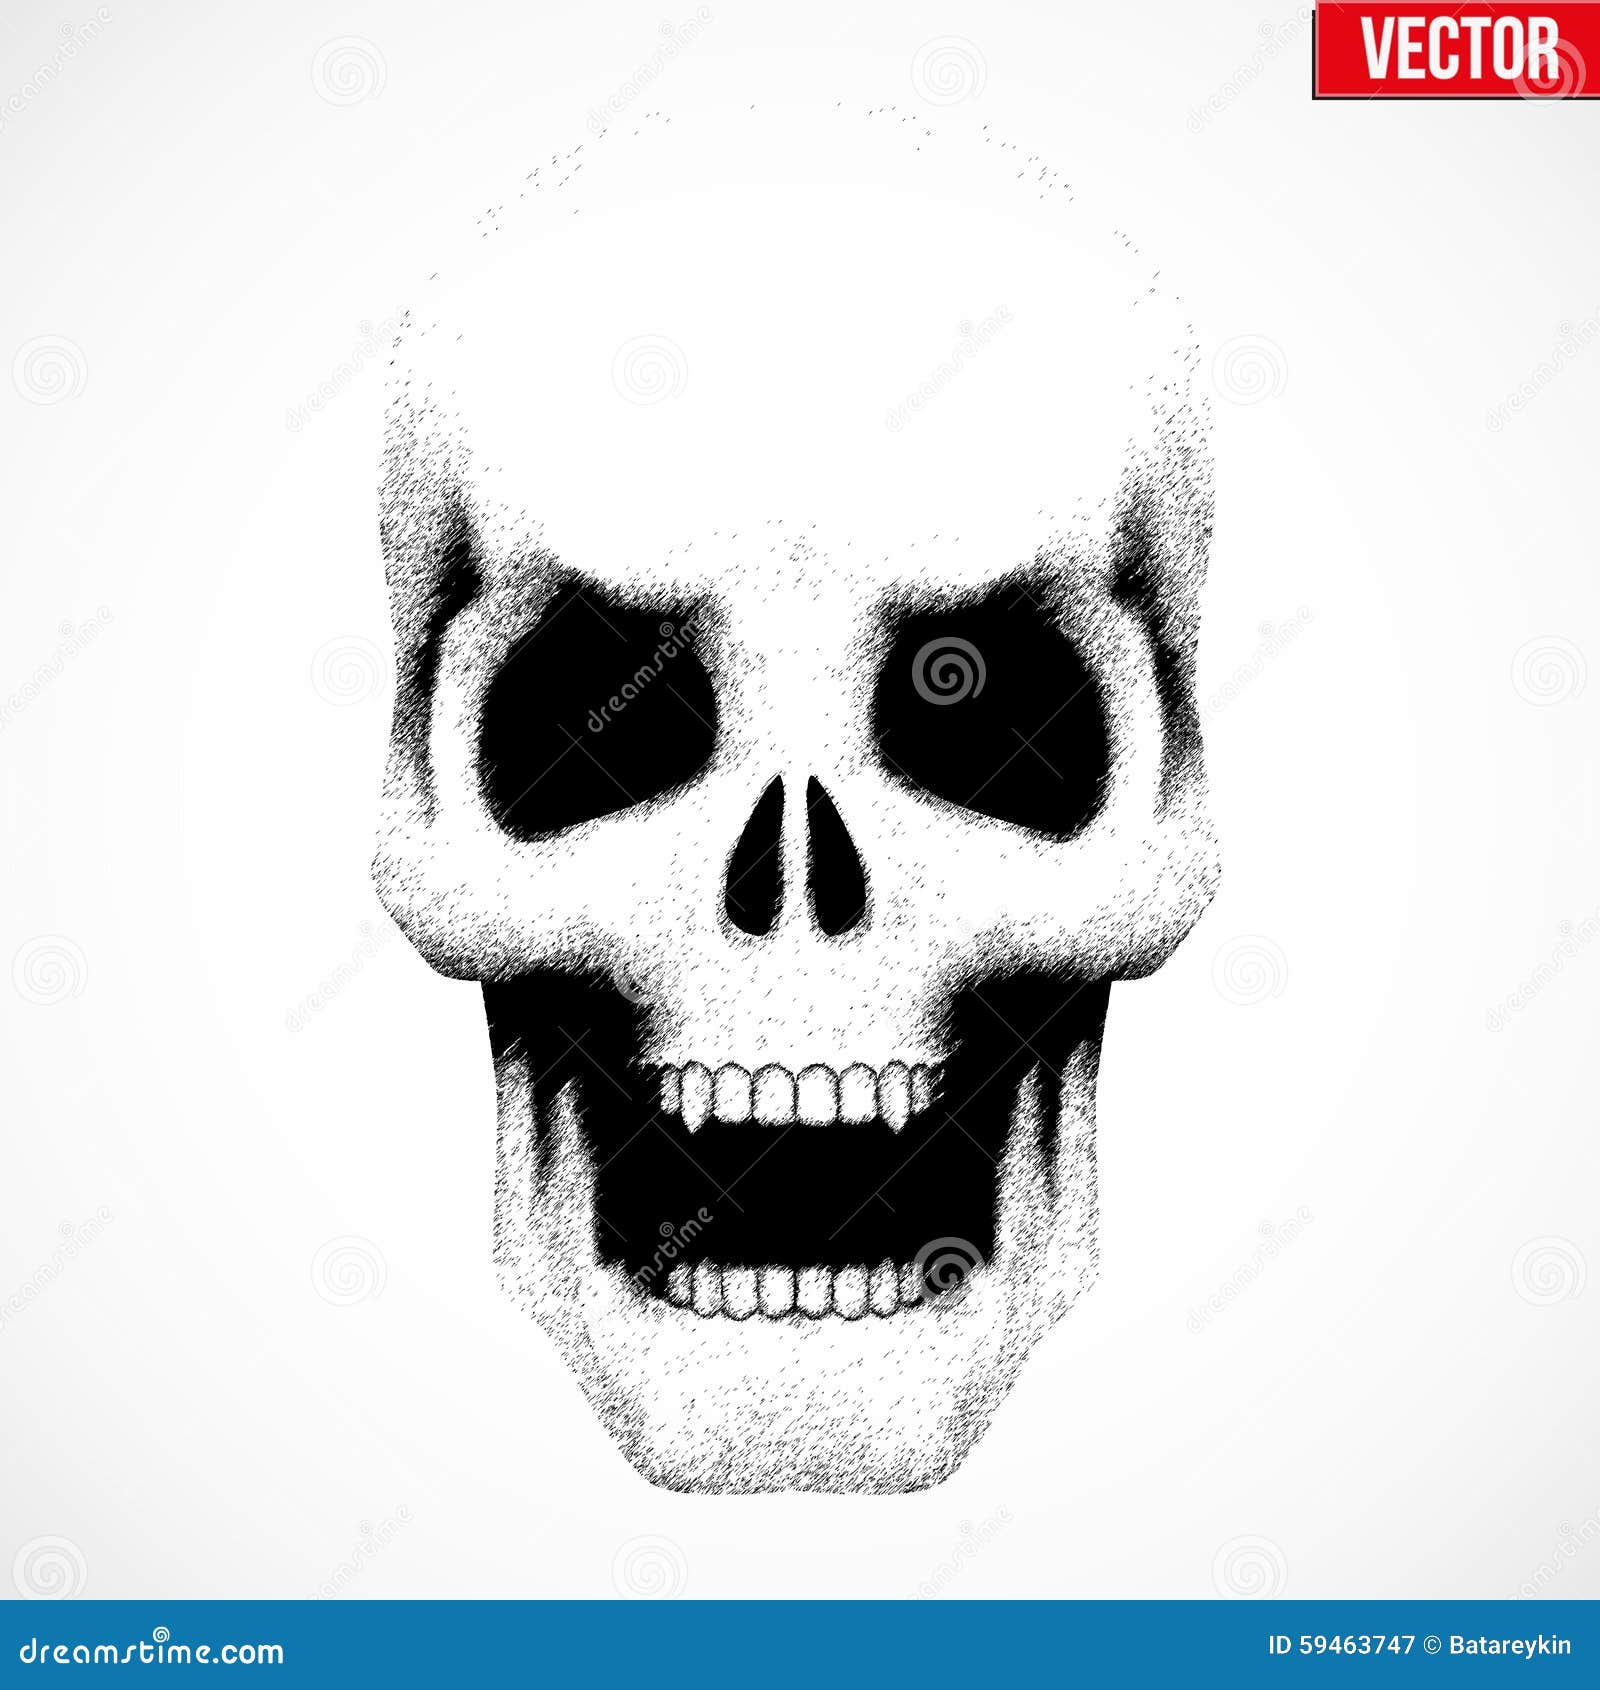 Human Skull With Open Mouth In Sketch Style Stock Vector - Image: 59463747